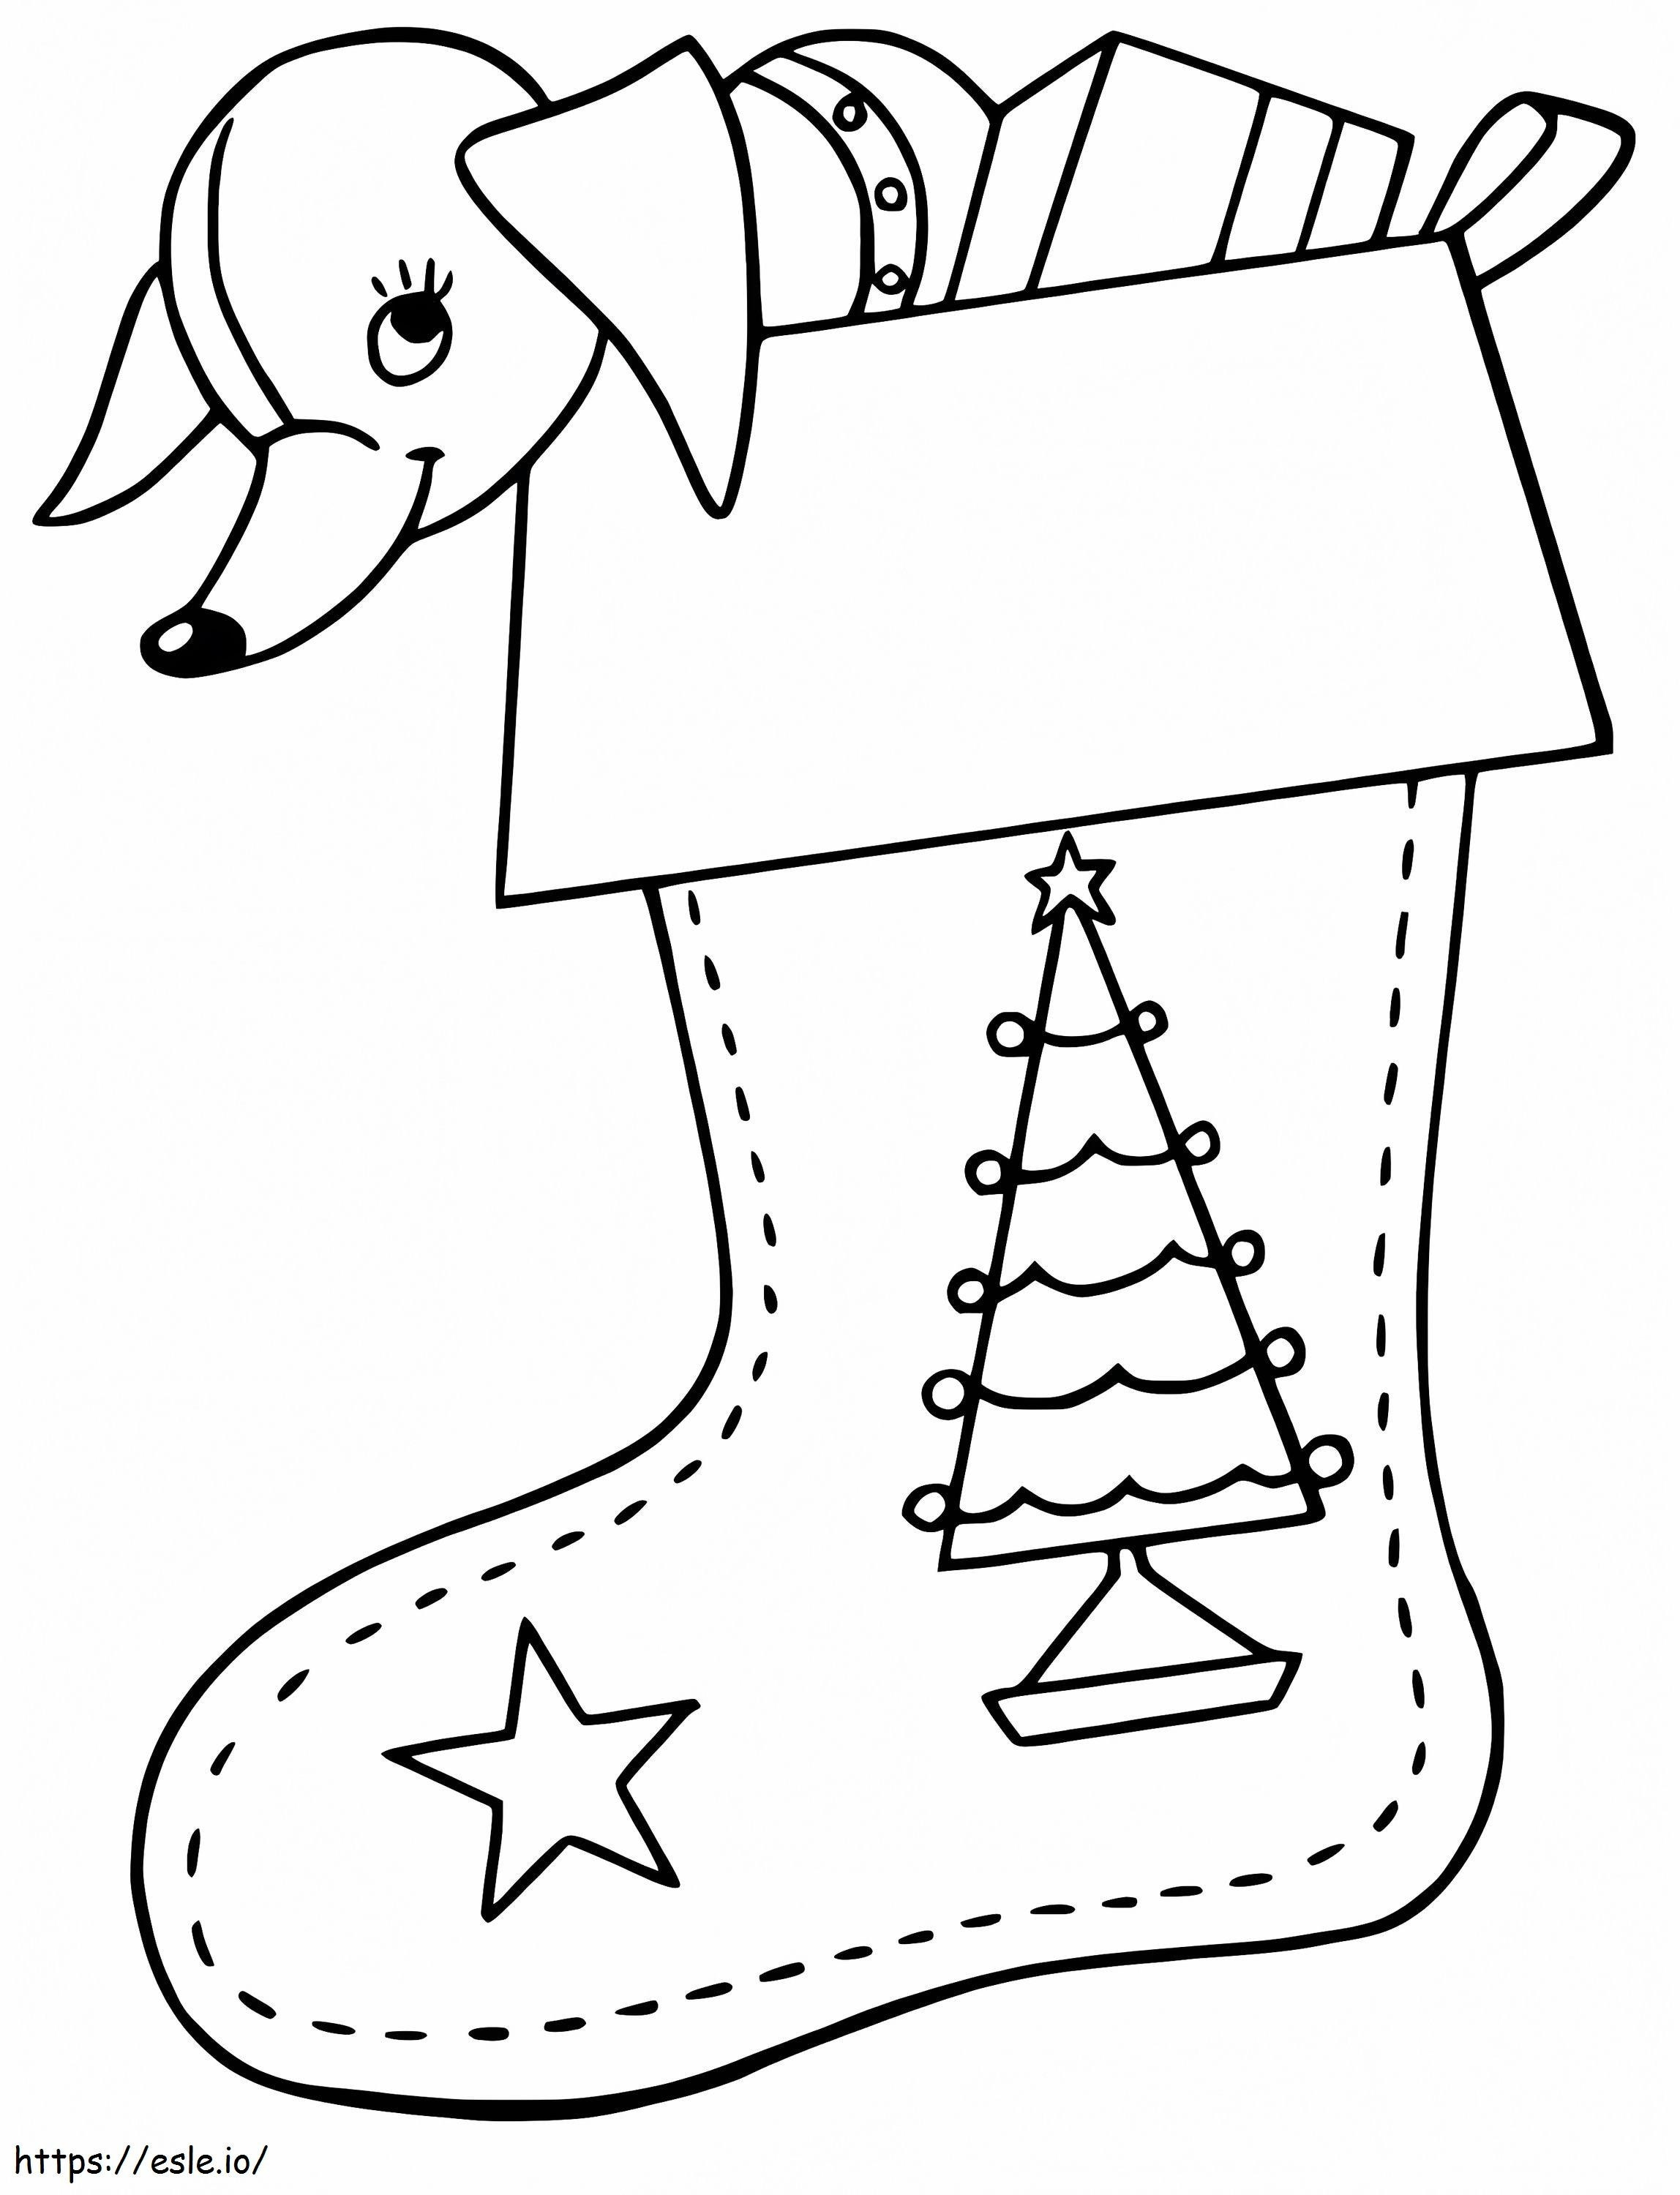 Cute Christmas Stocking coloring page